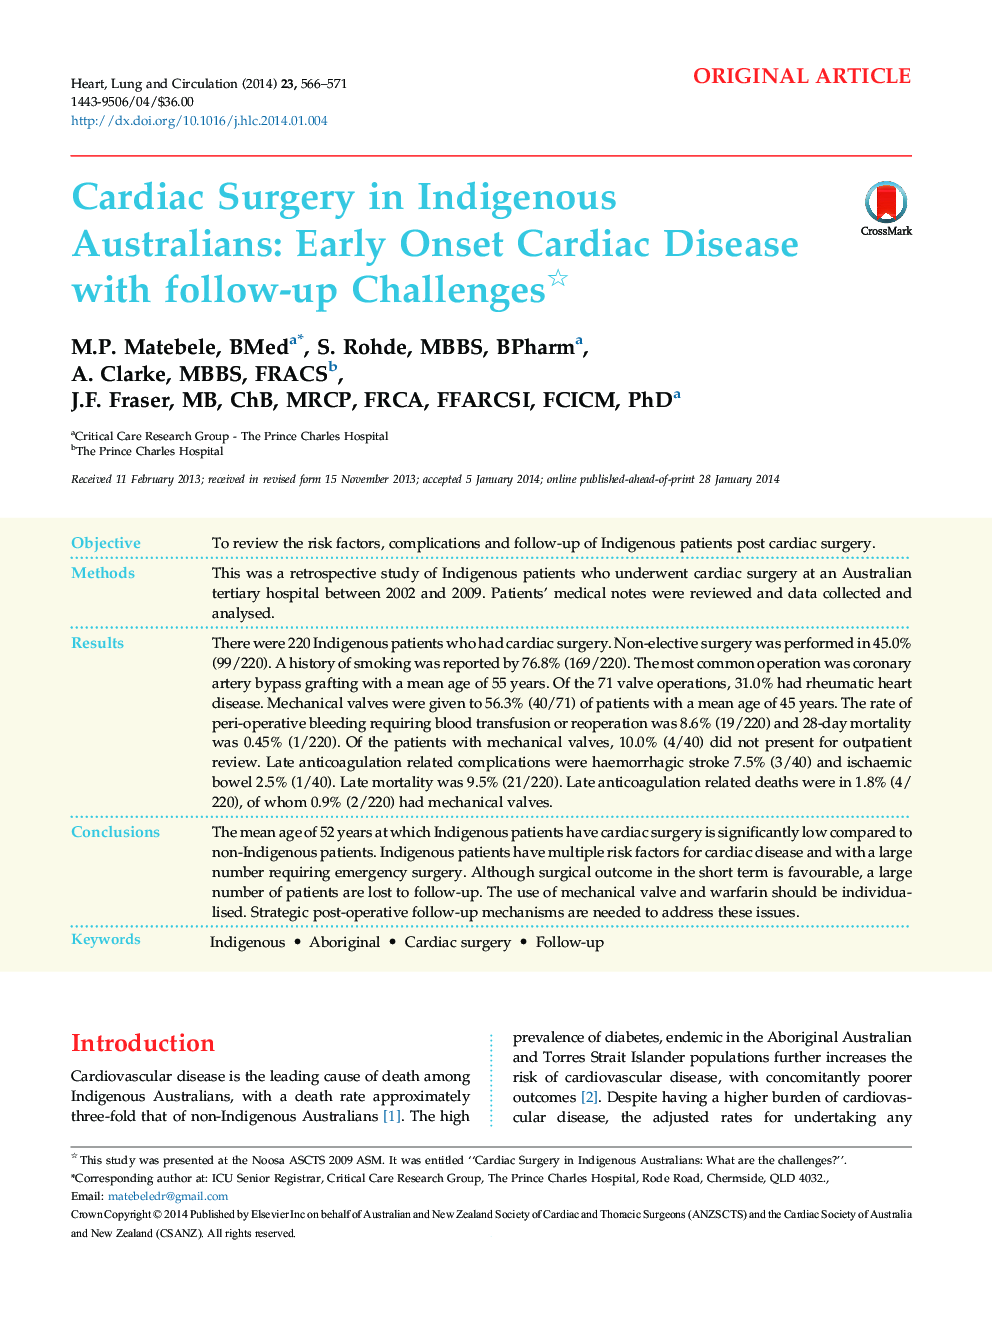 Cardiac Surgery in Indigenous Australians: Early Onset Cardiac Disease with follow-up Challenges 